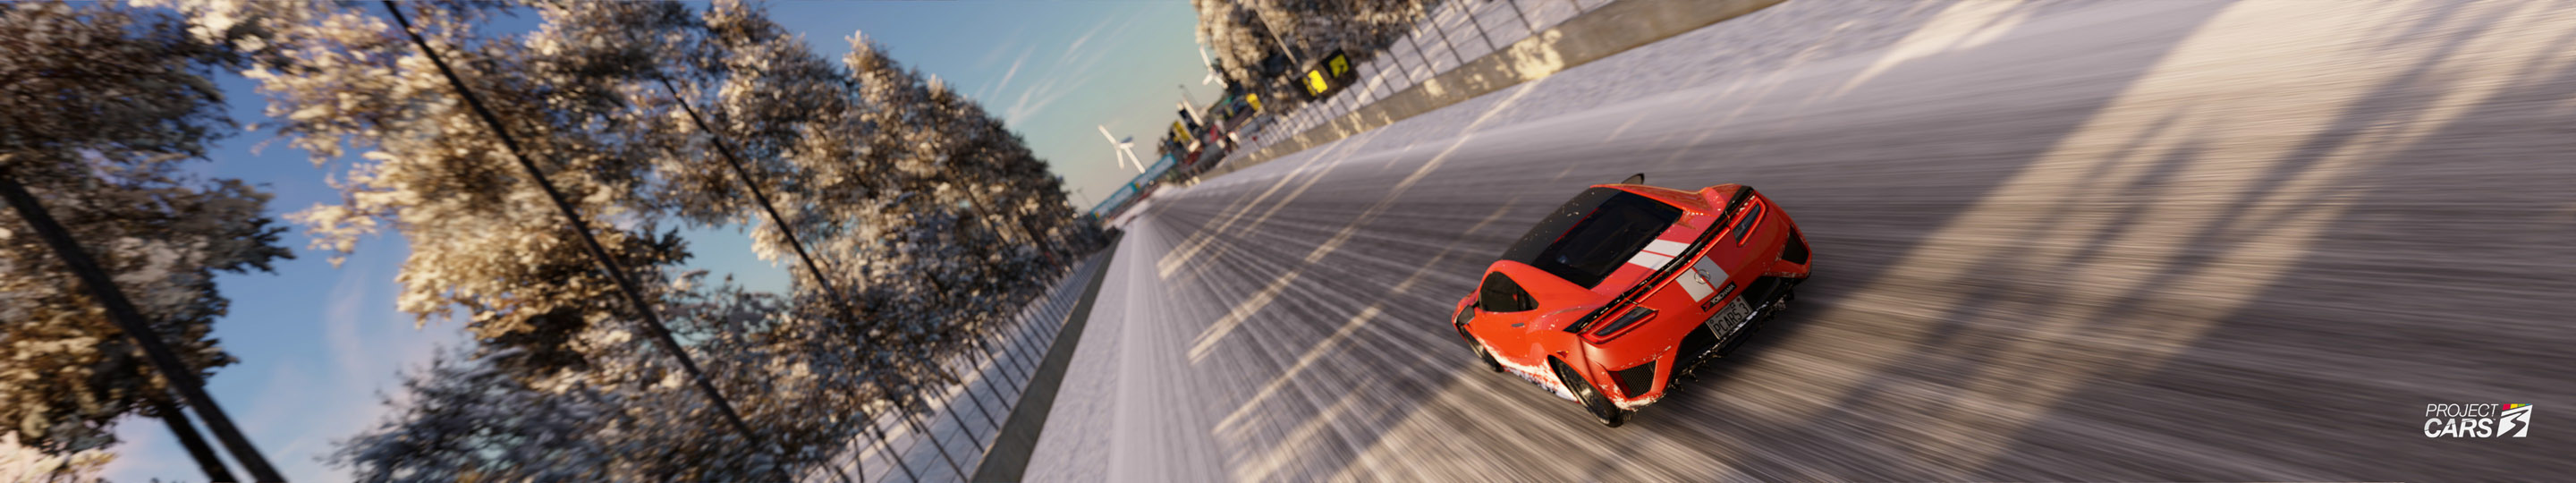 2 PROJECT CARS 3 ACURA NSX 2020 at ZOLDER Snow copy.jpg